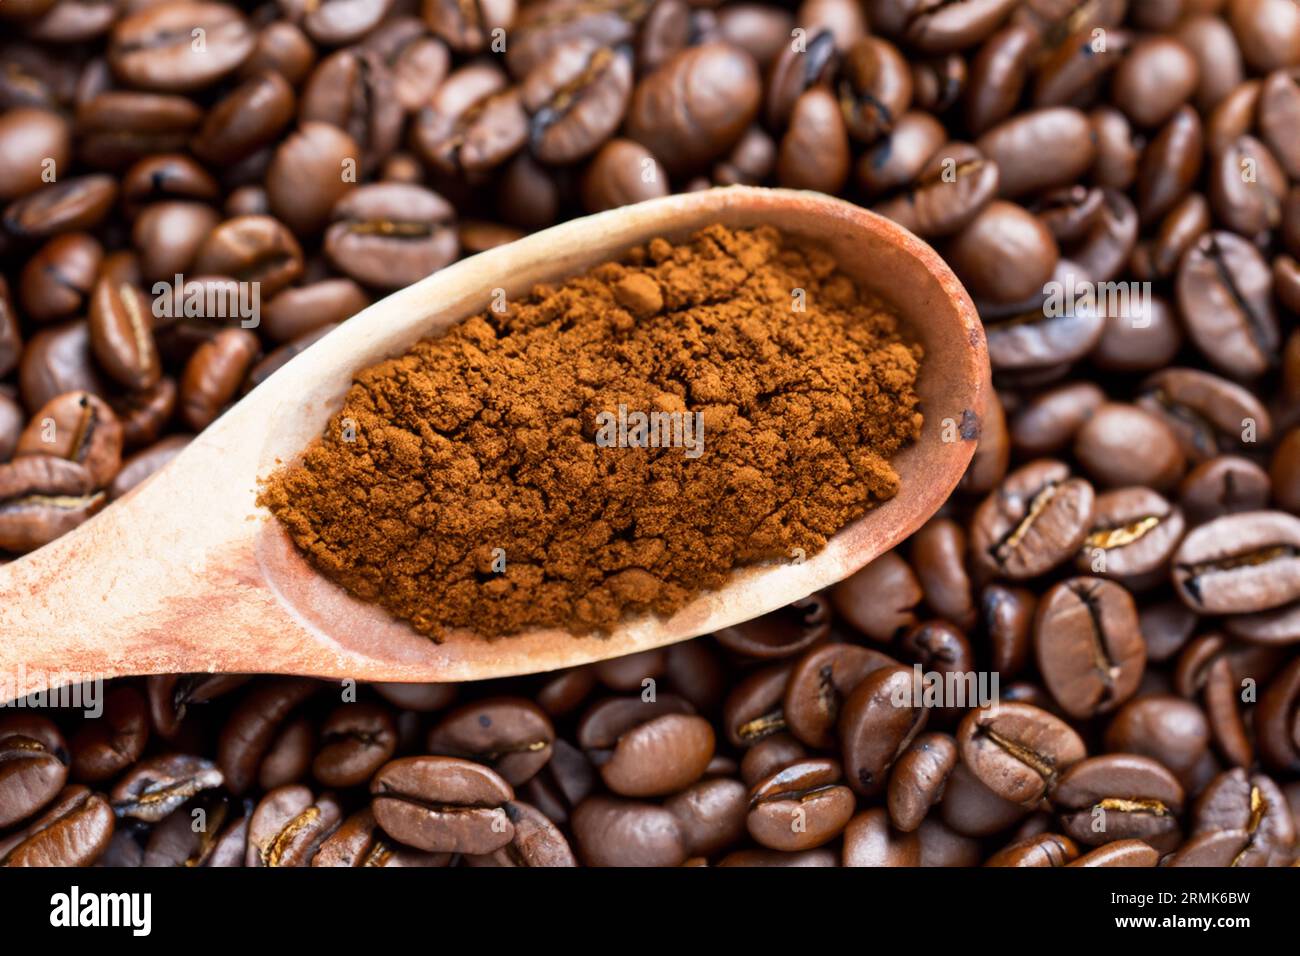 spoon with powder and coffee beans on old wooden spoon Stock Photo